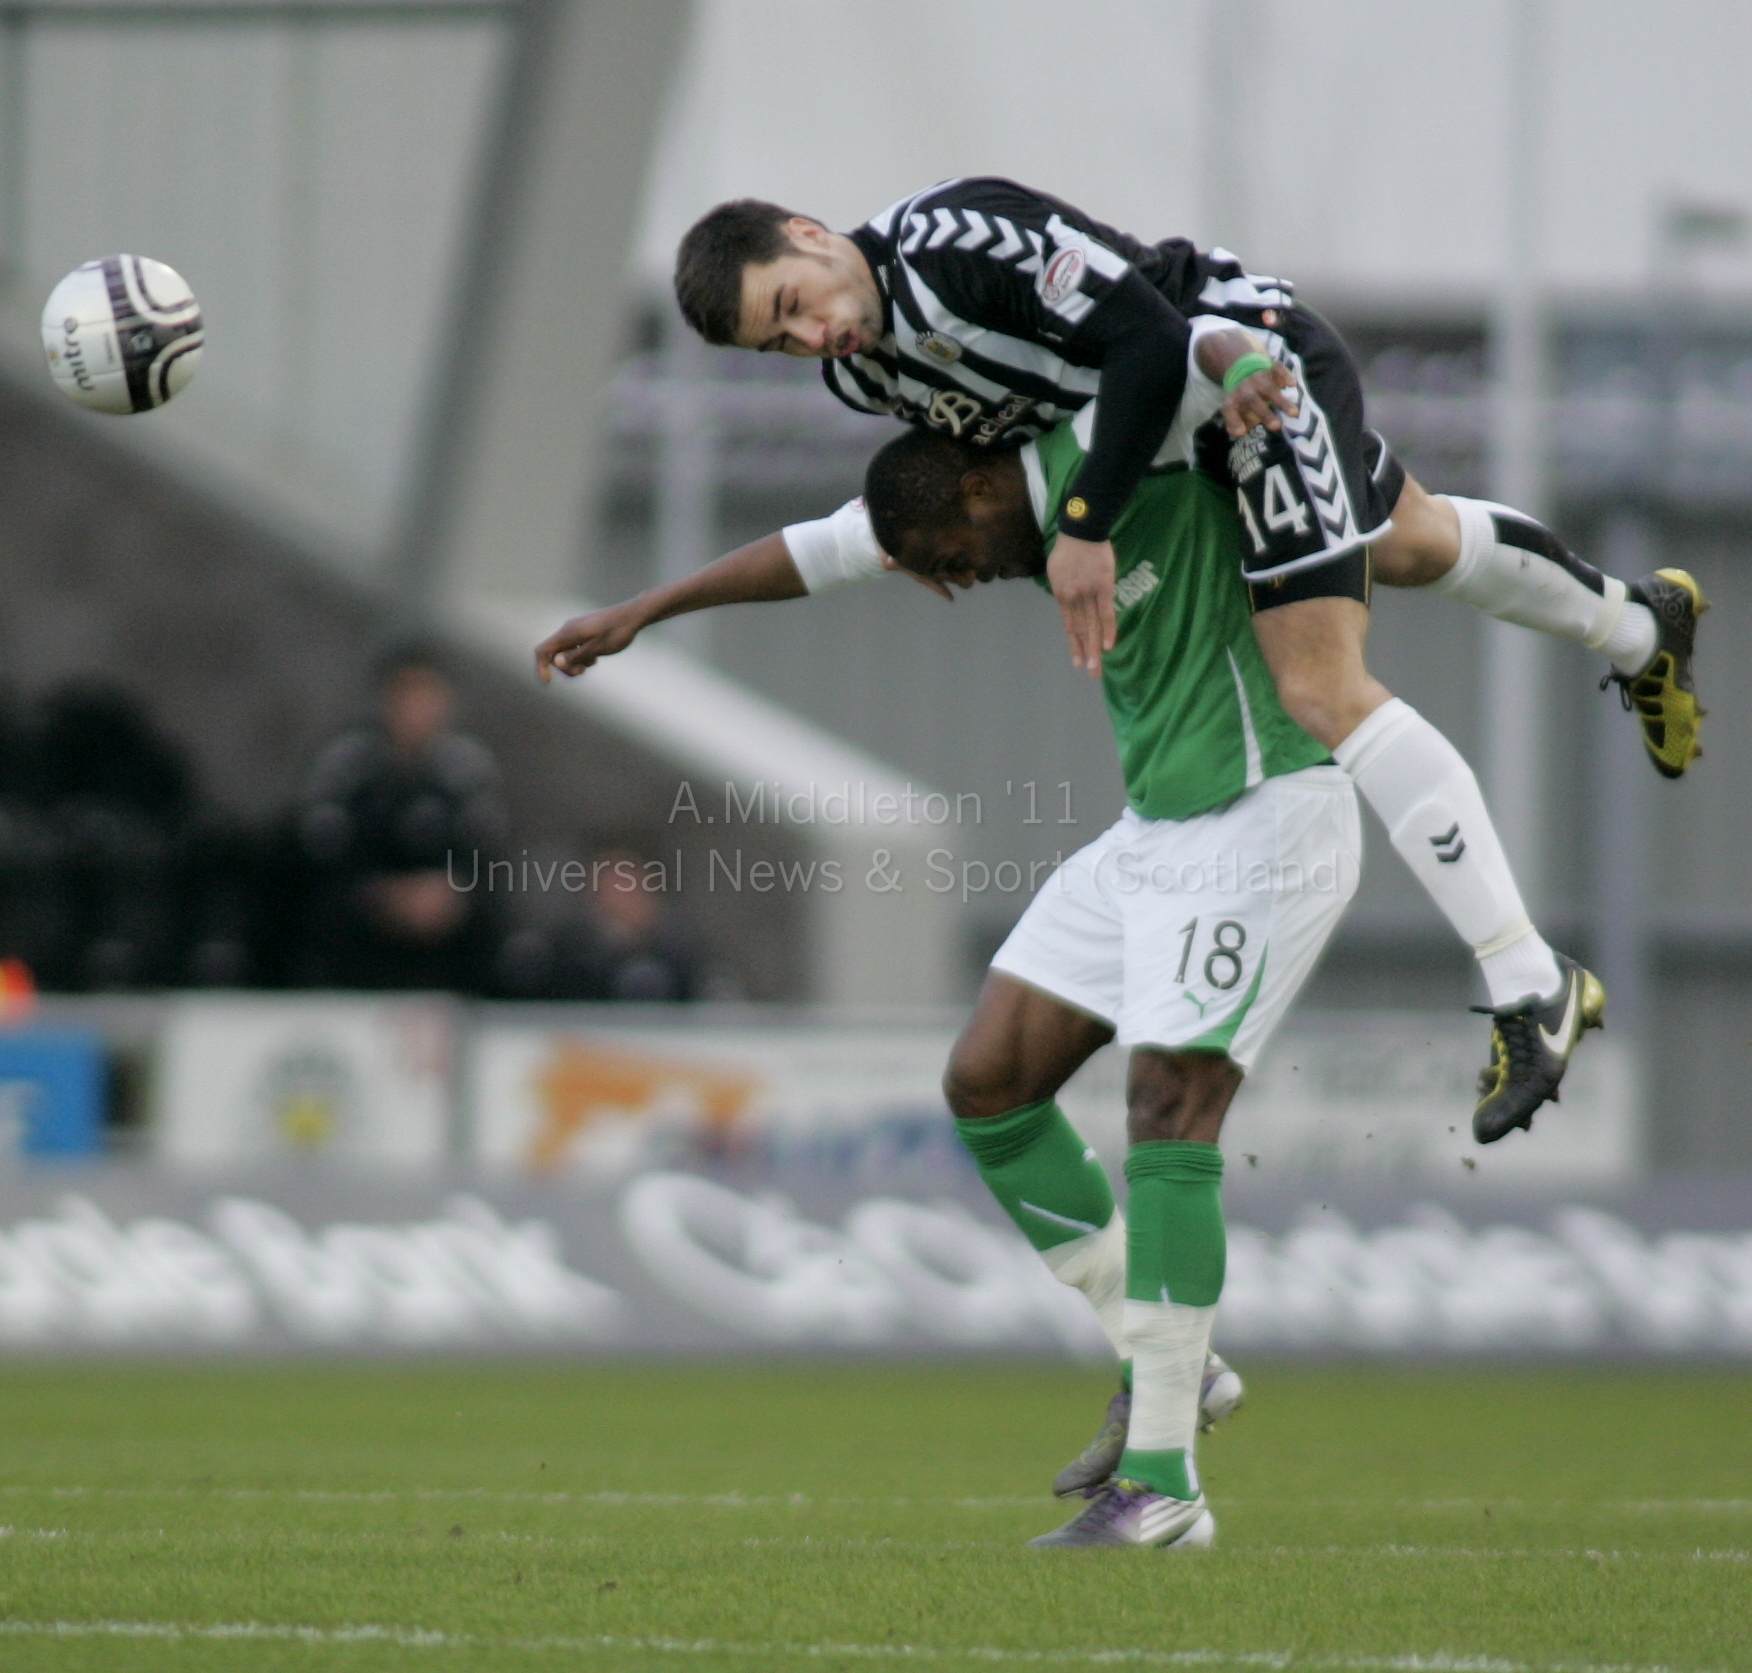 two soccer players jump for the ball during a match